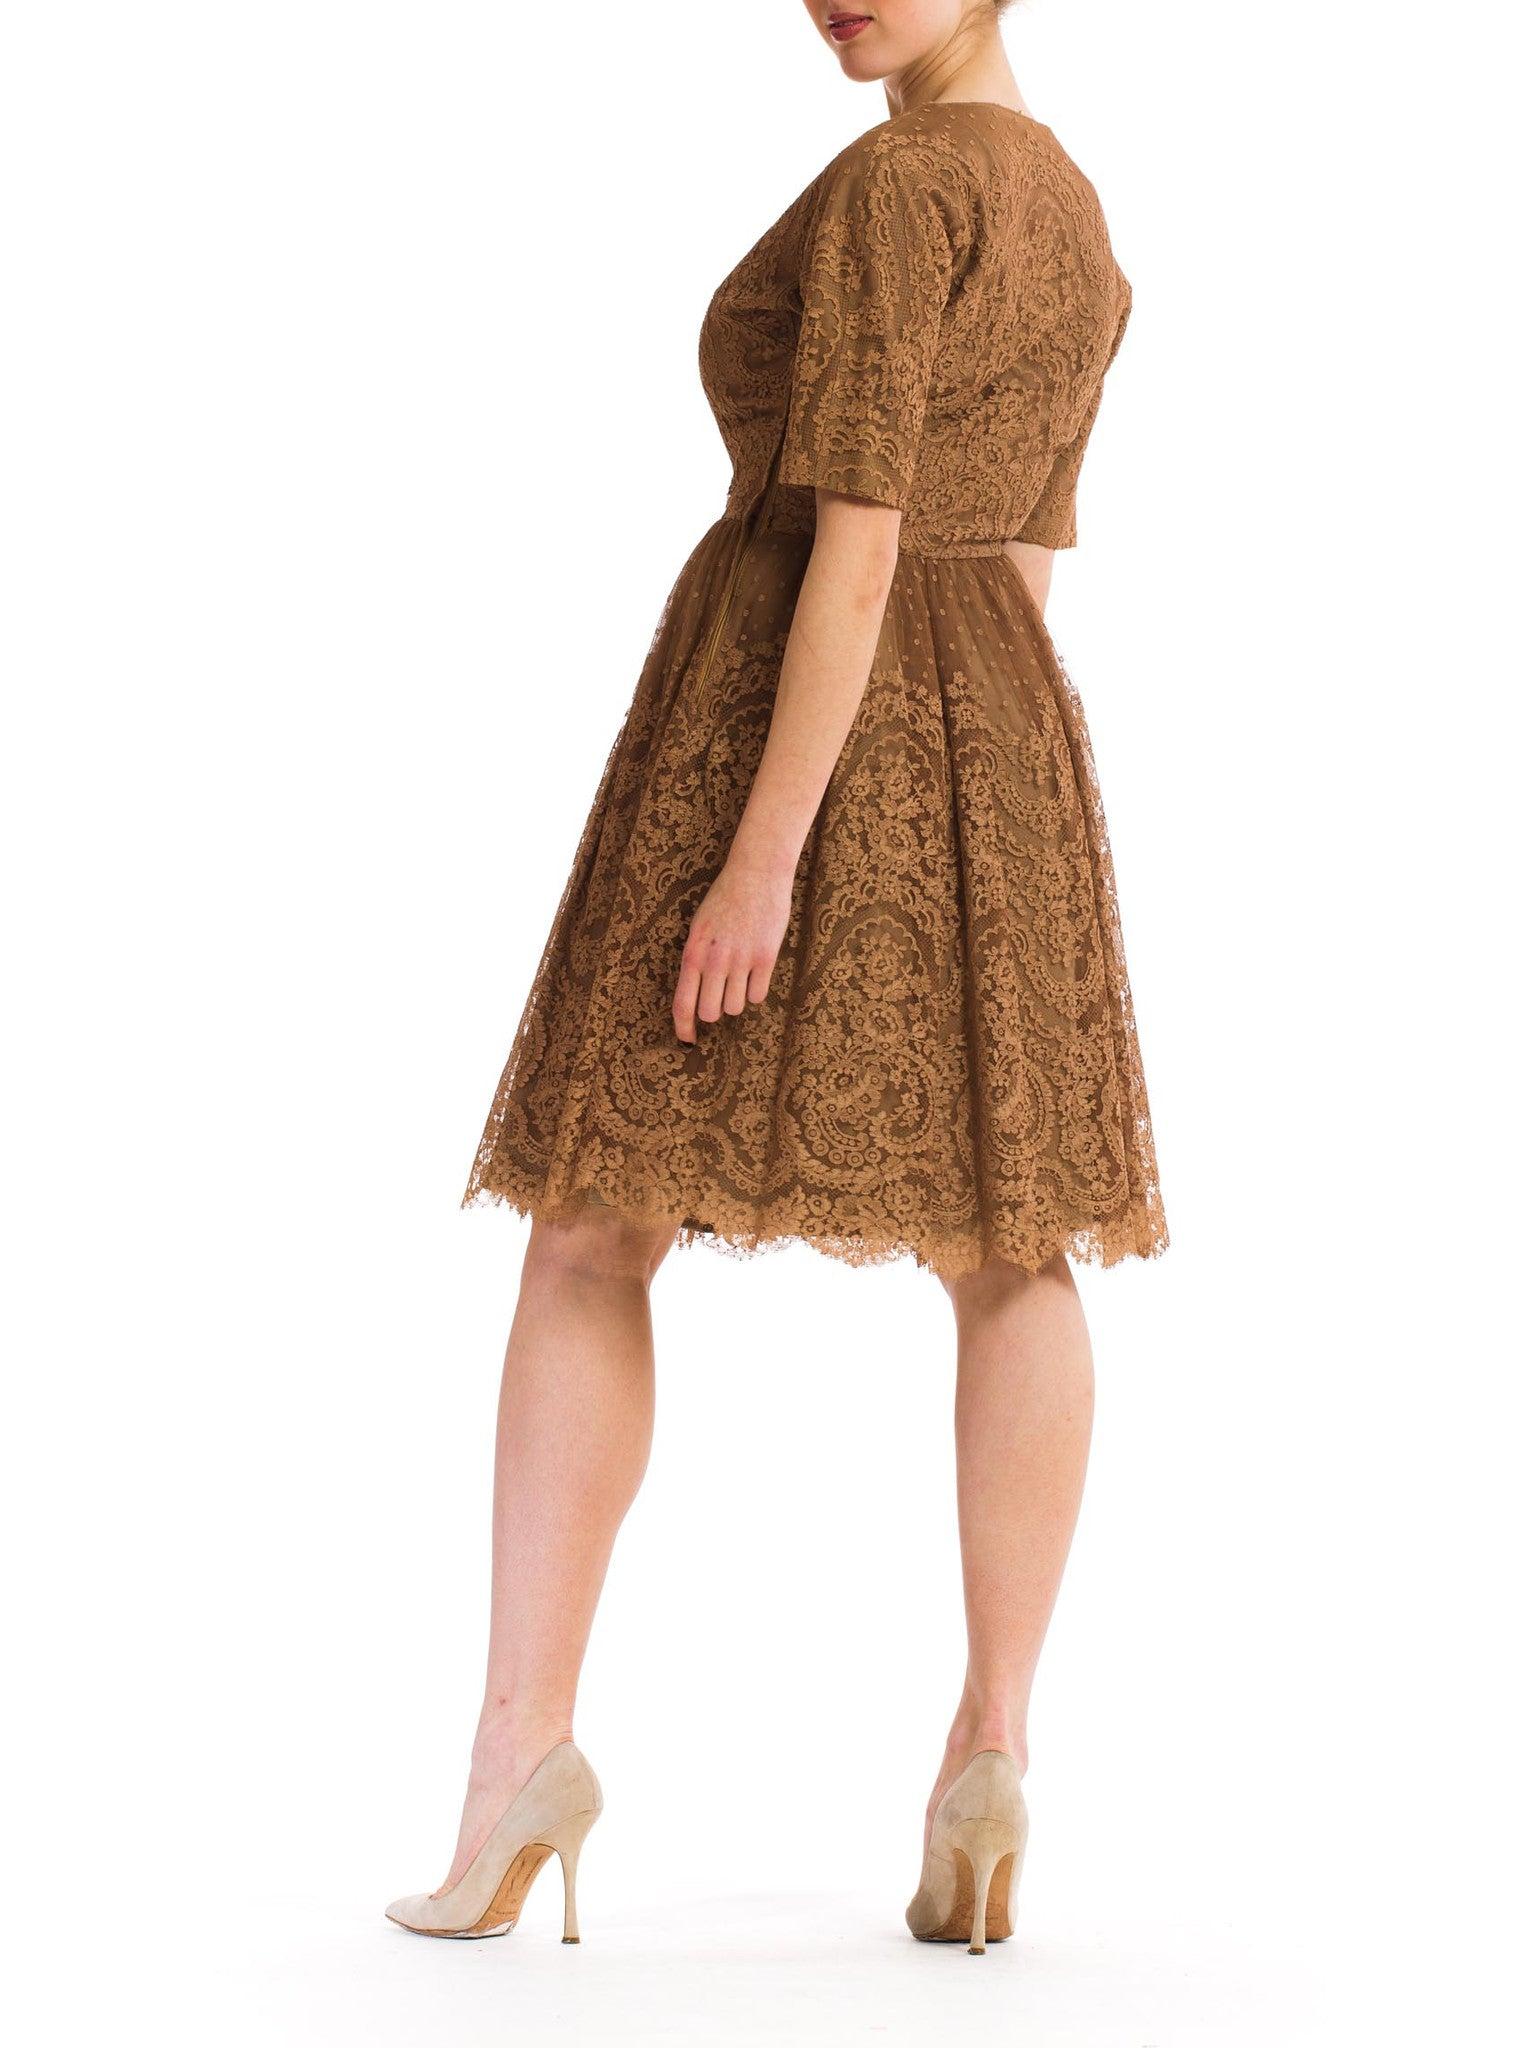 1950S NAT KAPLAN Brown Rayon & Silk Chantilly Lace Short Sleeve Cocktail Dress For Sale 4